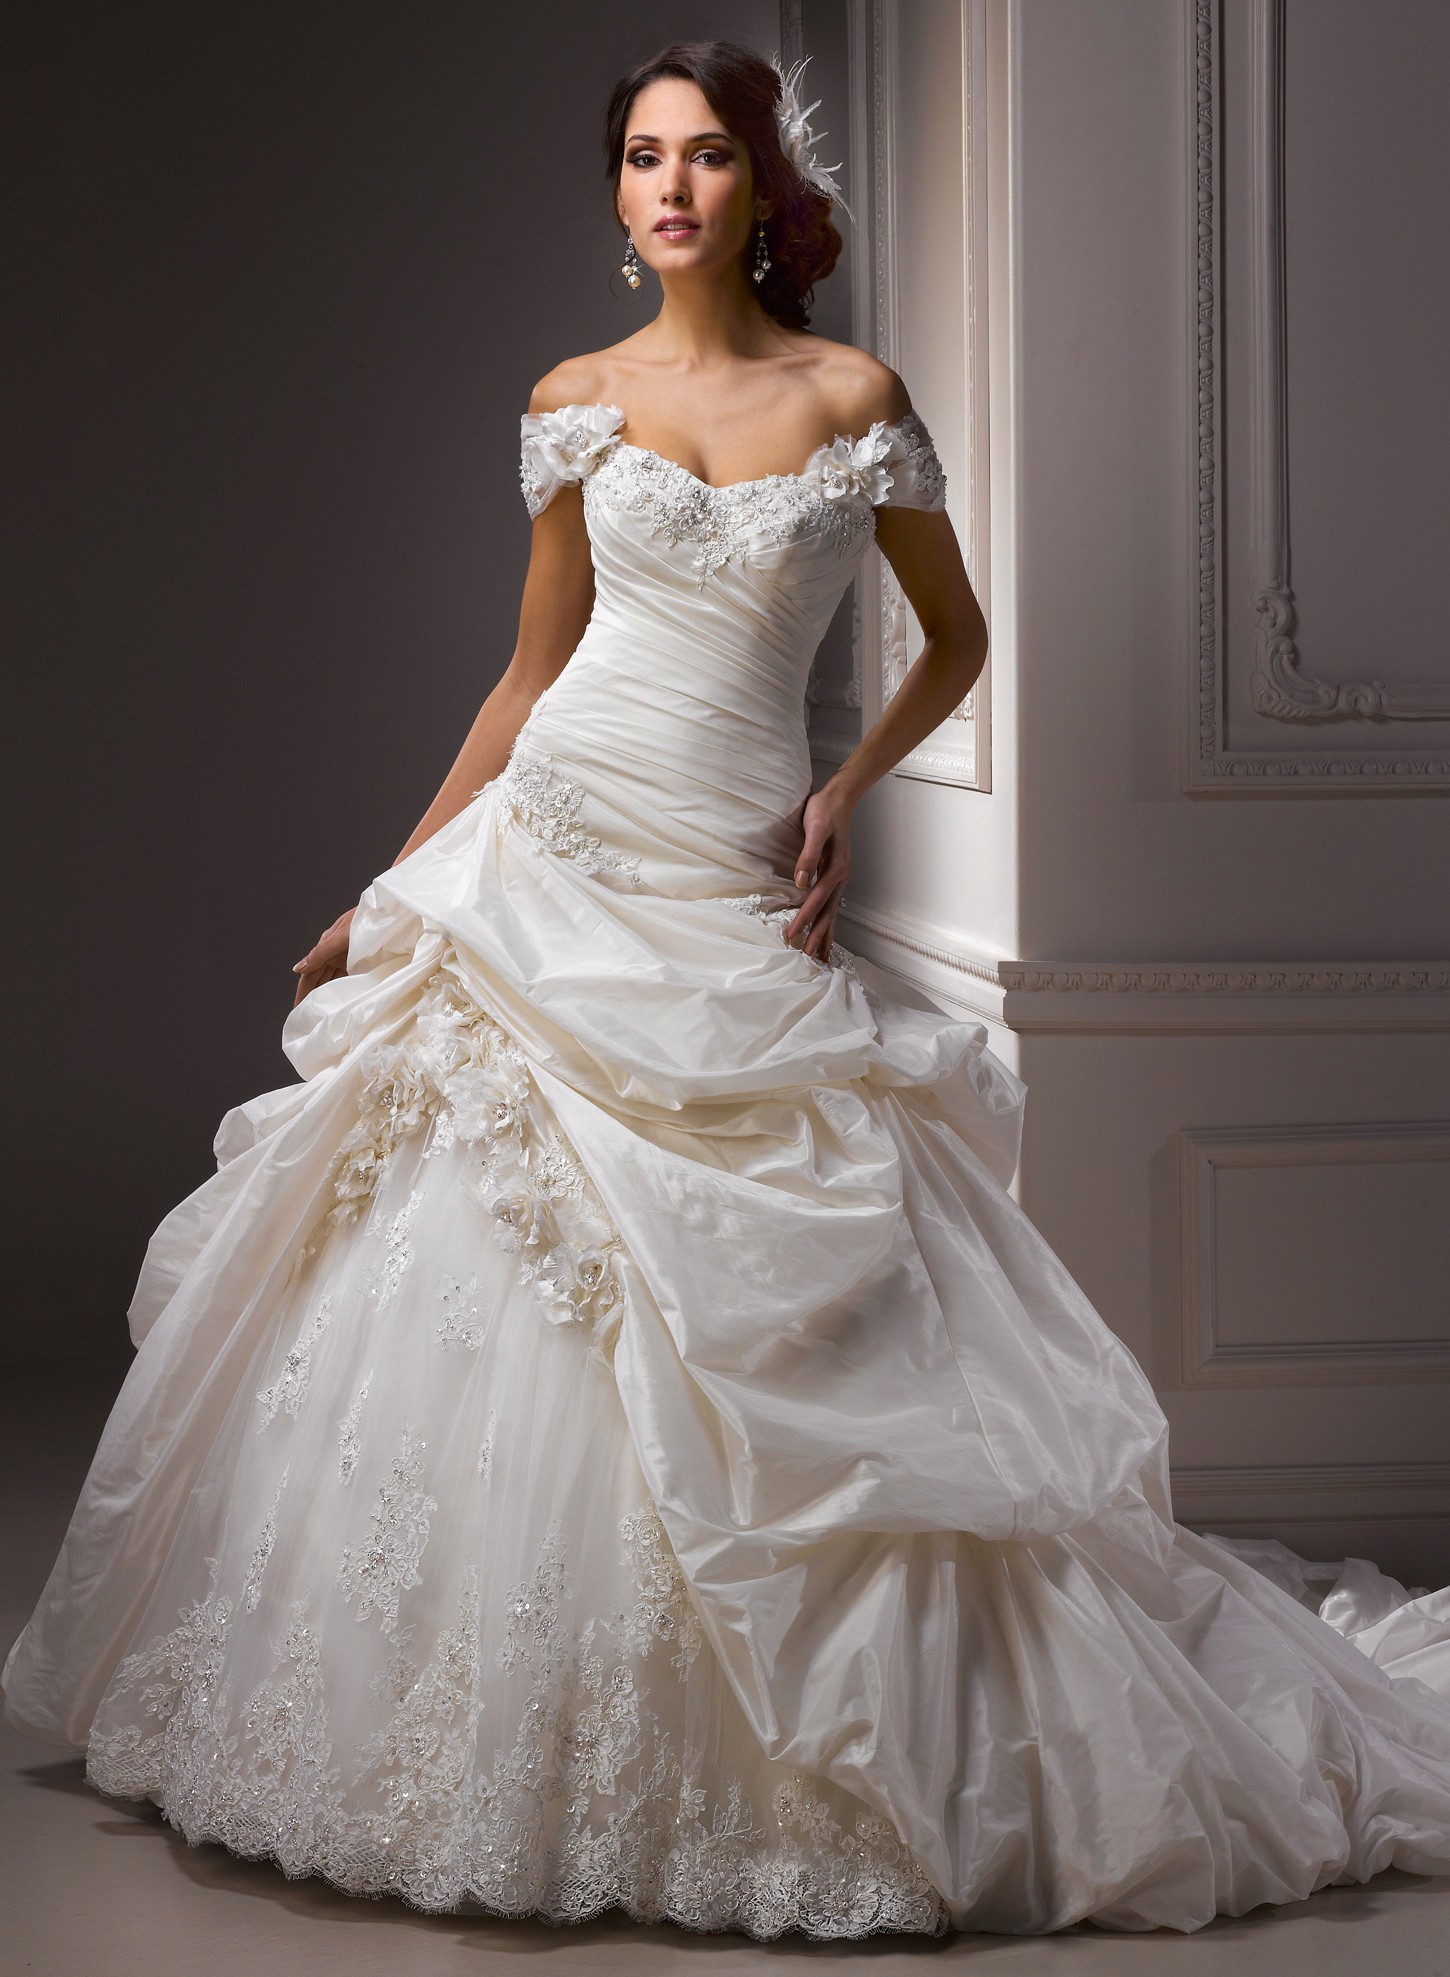 The Irresistible Attraction of Ball Gown Wedding Dresses ...